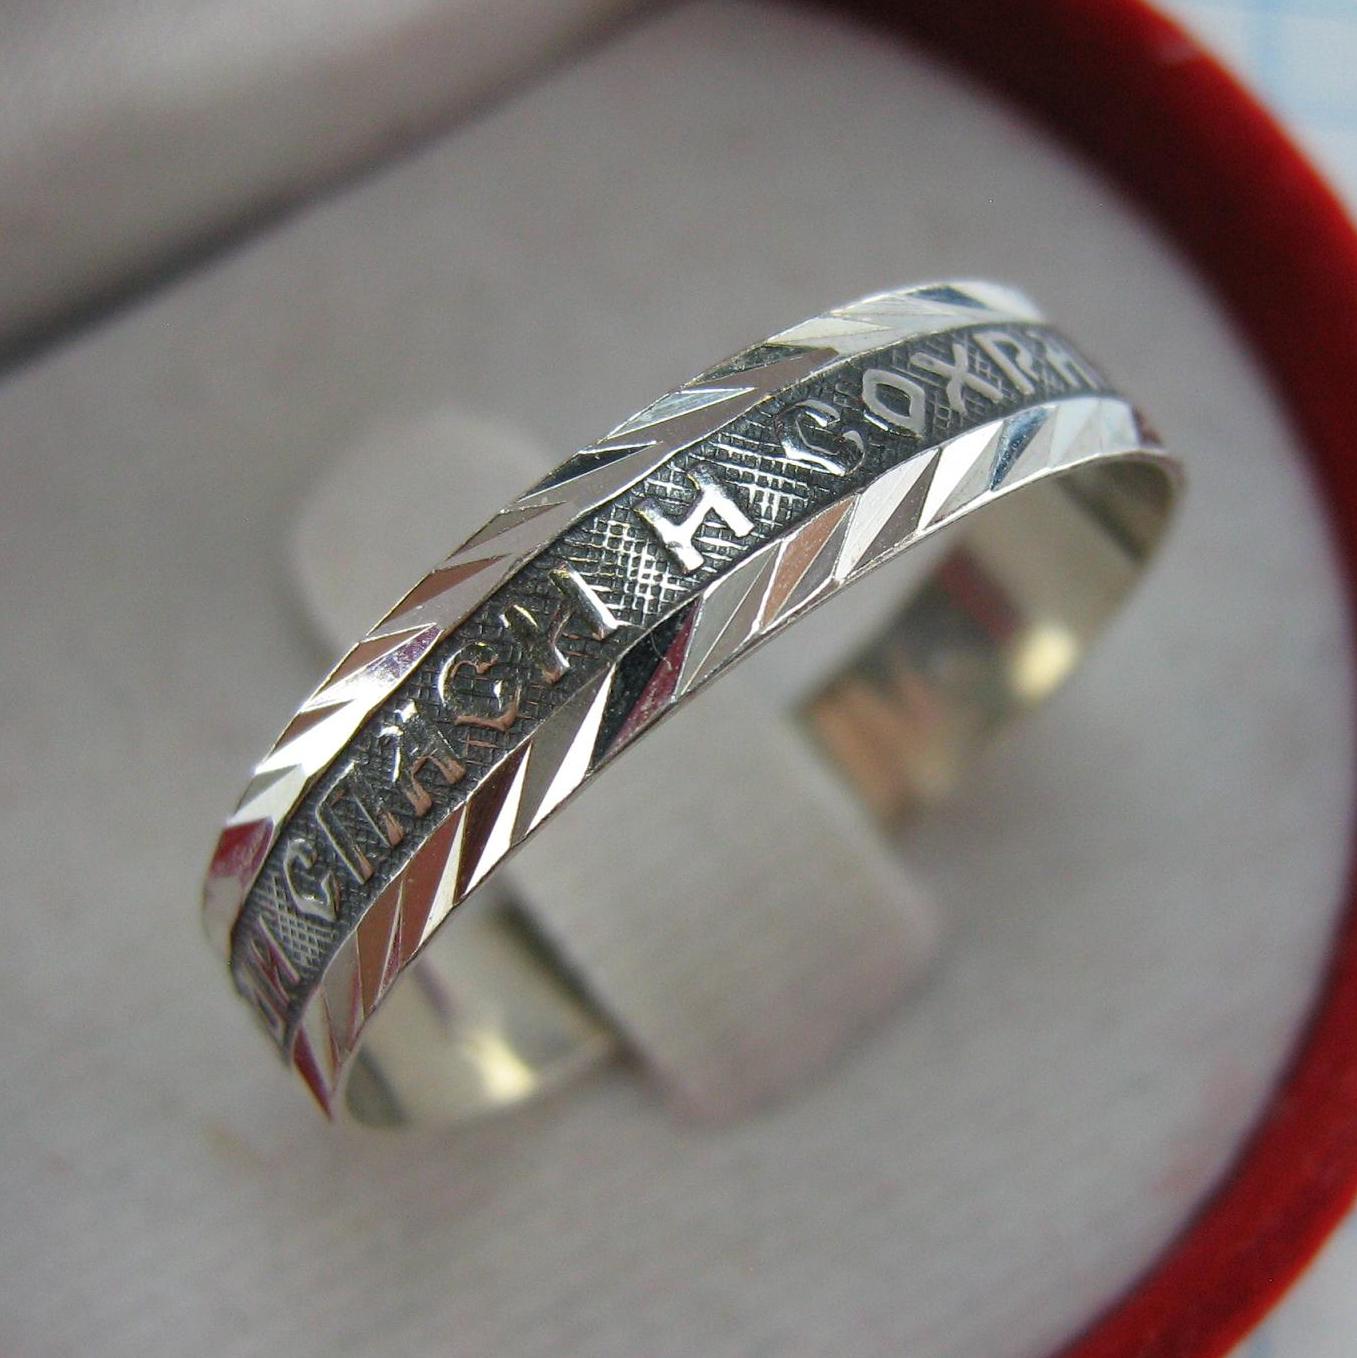 Real solid 925 Sterling Silver band with Christian prayer words to God on the oxidized background with old believers cross and textured pattern